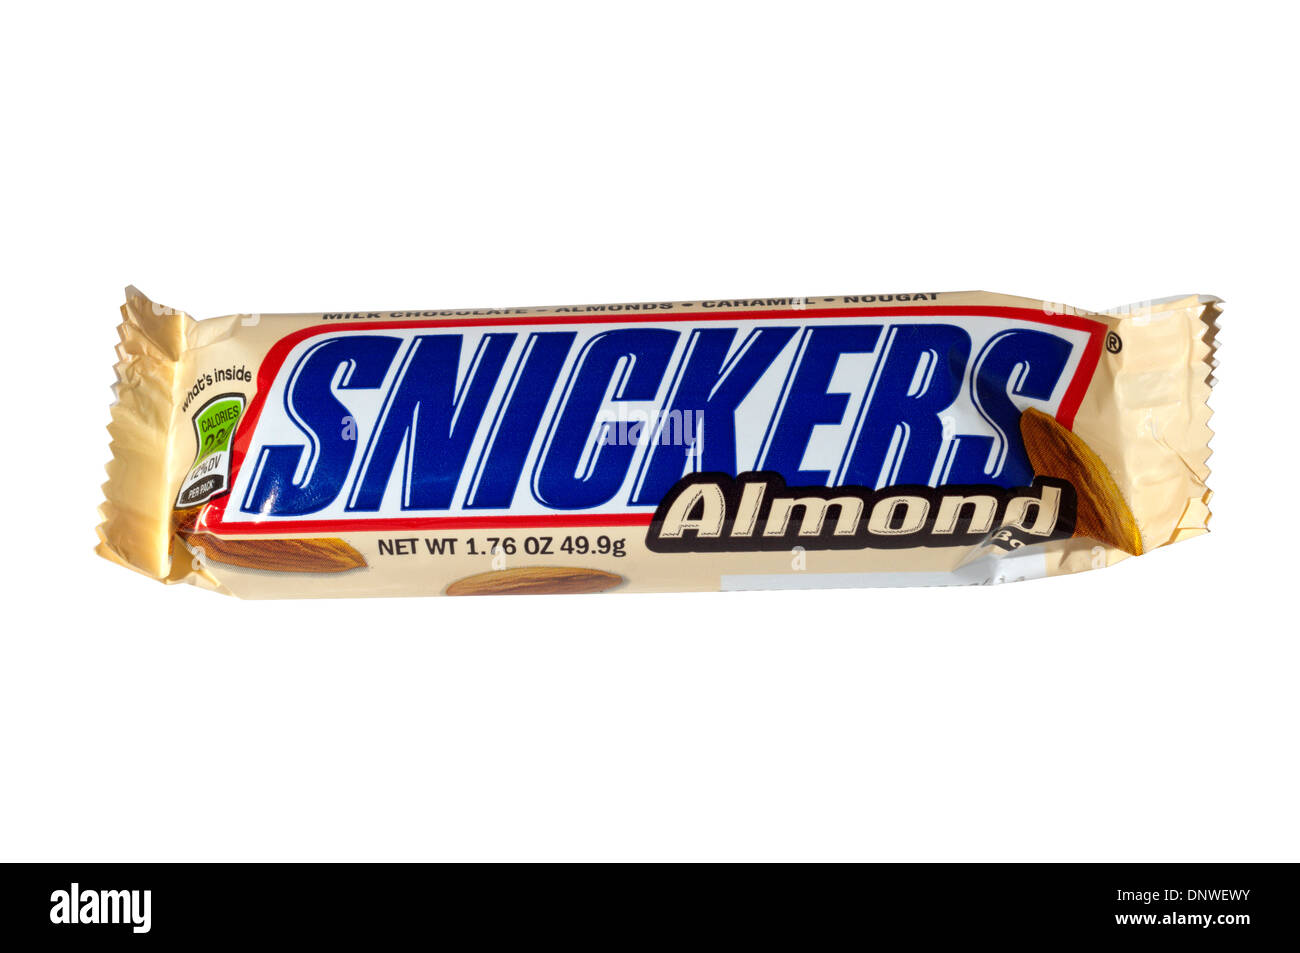 An Almond Snickers bar made by Mars incorporated, previously known as Marathon. Stock Photo